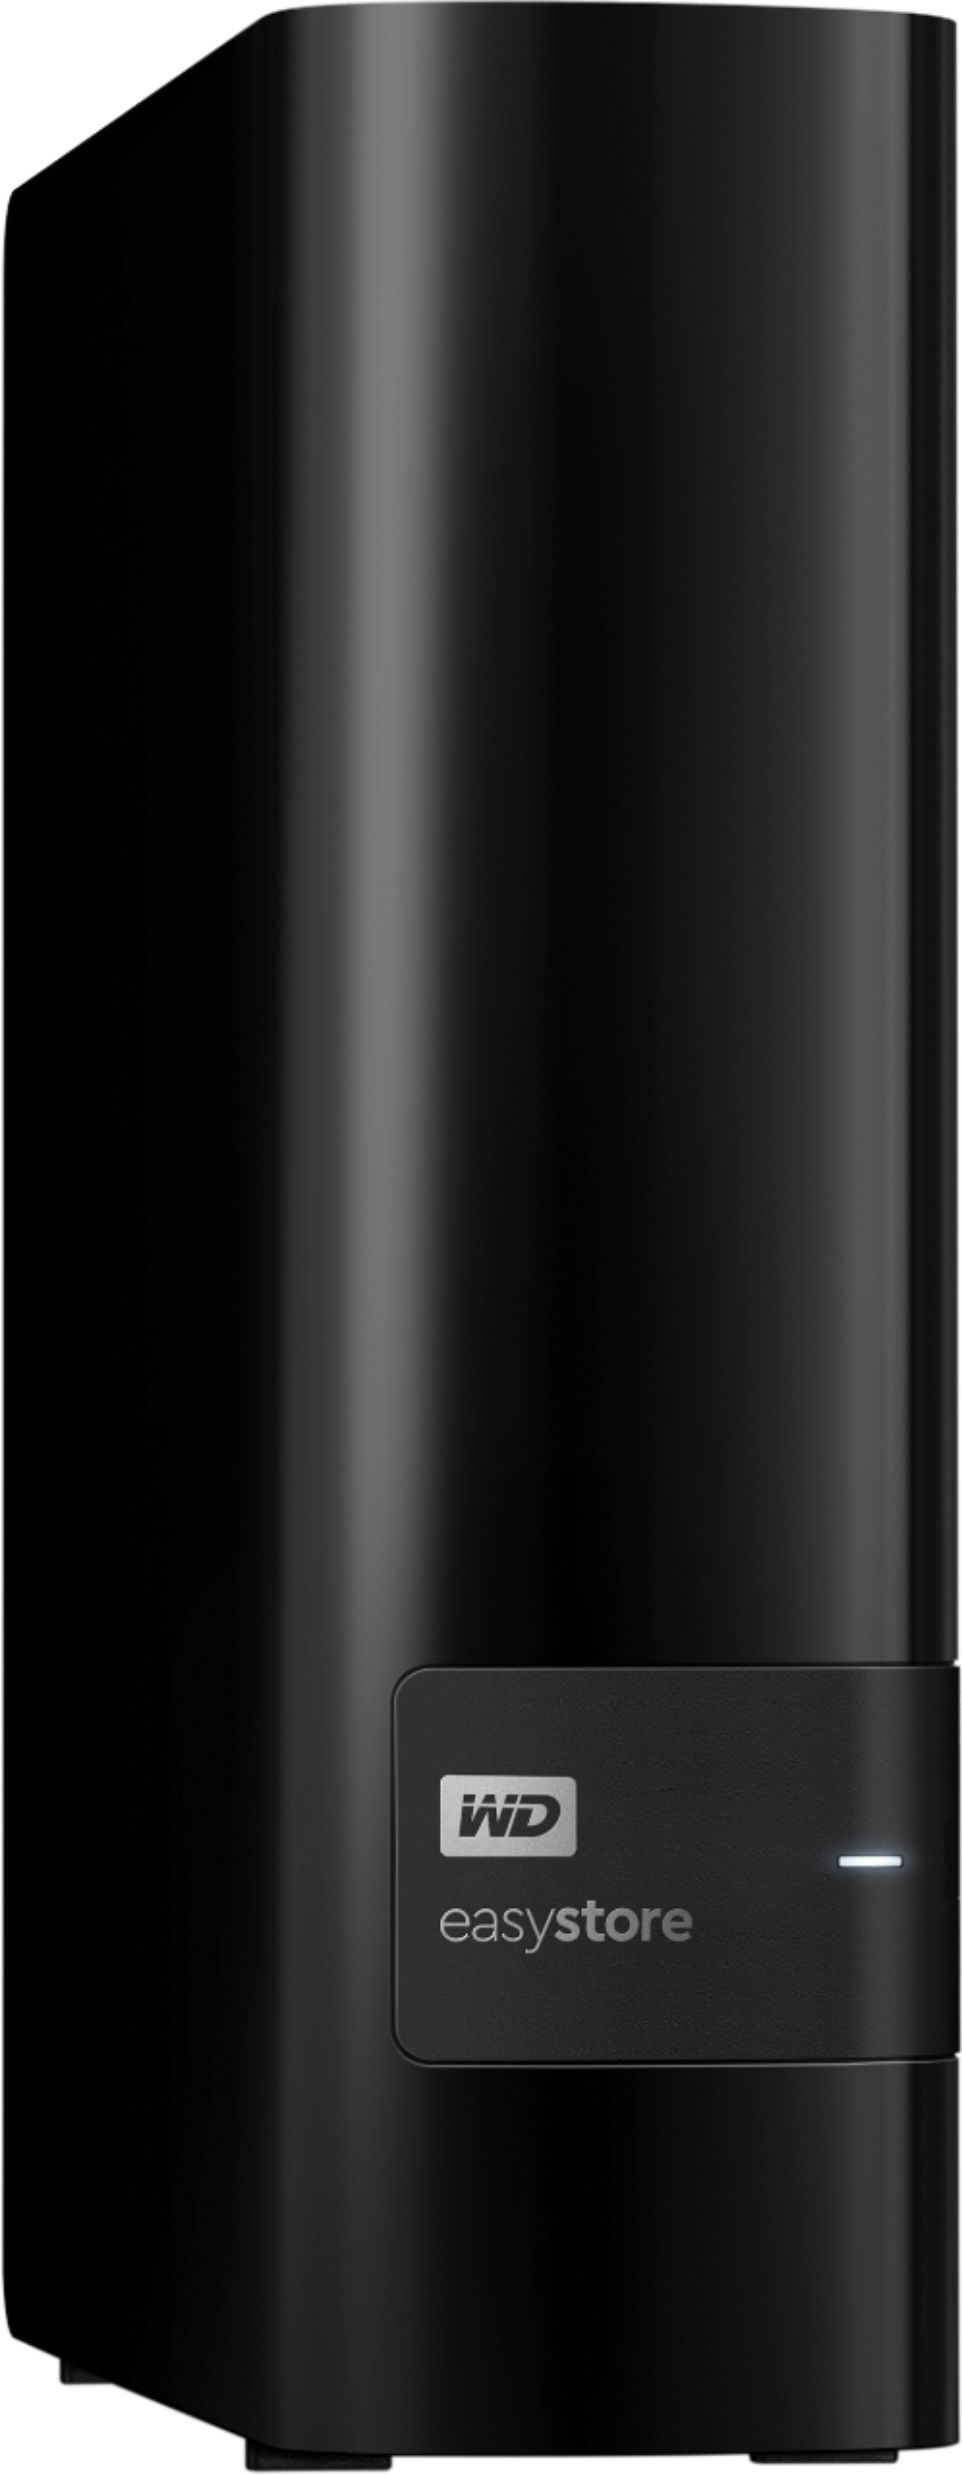 Zoom in on Angle Zoom. WD - easystore 4TB External USB 3.0 Hard Drive - Black.